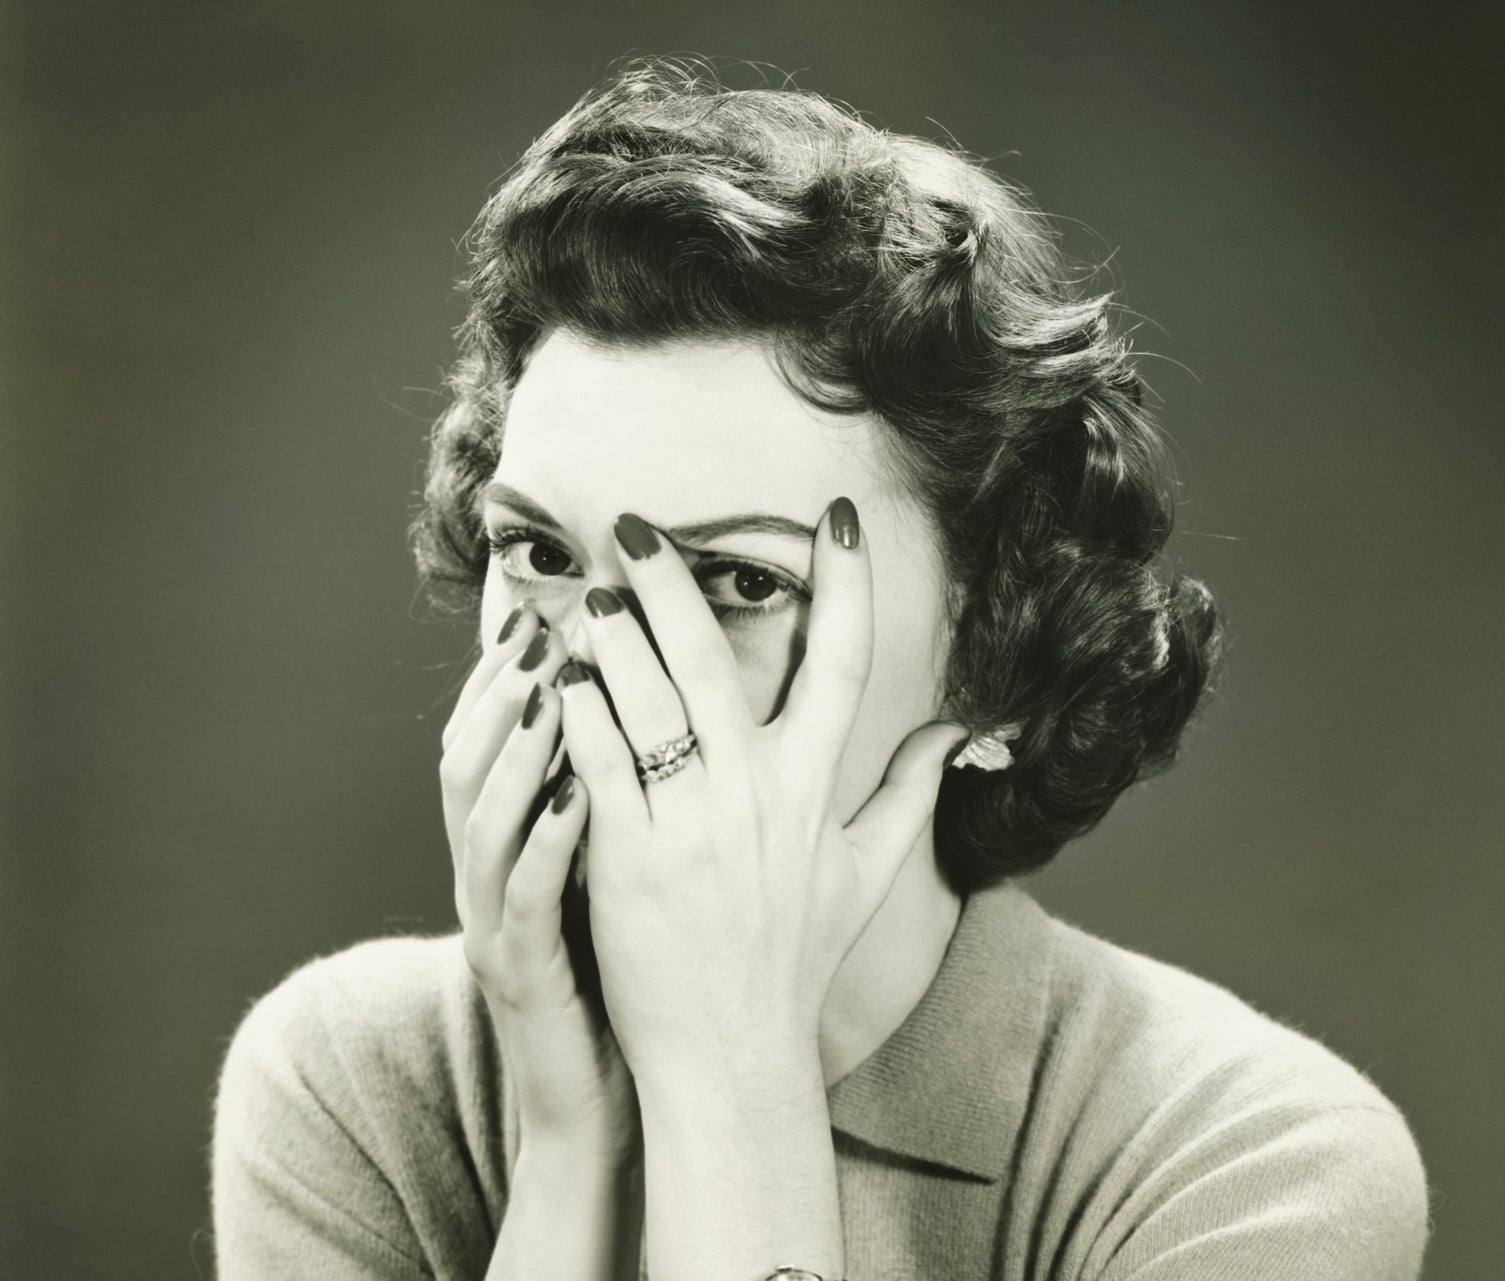 Woman with hands covering face, peeking through fingers, appears pensive or playful